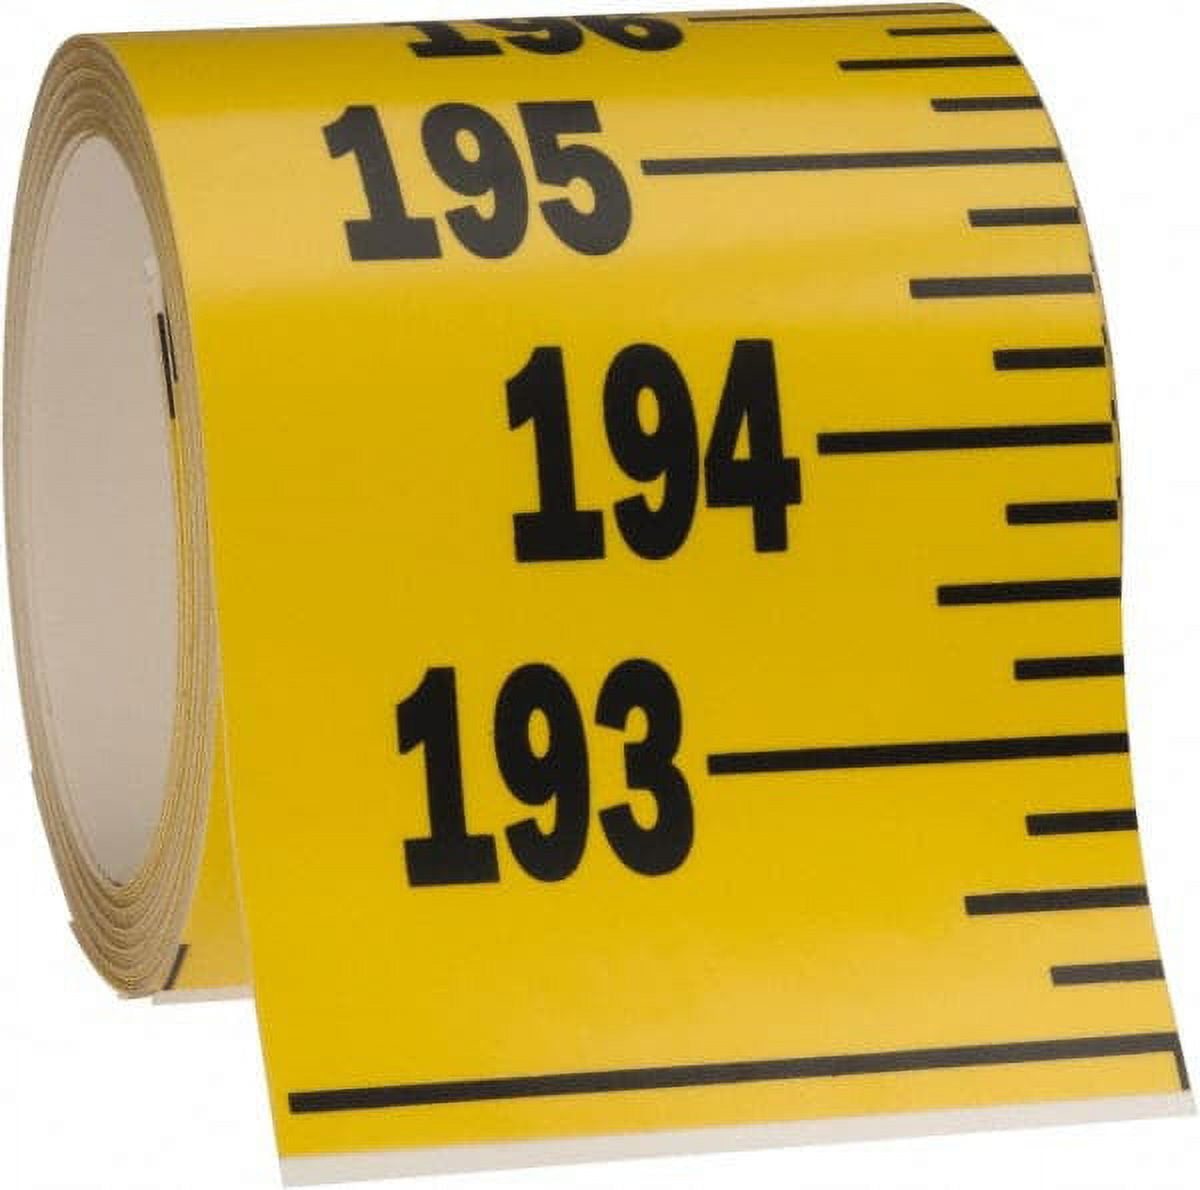 40 Foot Tape Measure – Wide Blade – Engineer Scale, Imperial Inch/Foot, Metric – Bottom Hole Assembly – BHA Tape – Directional Drilling Tape Measure